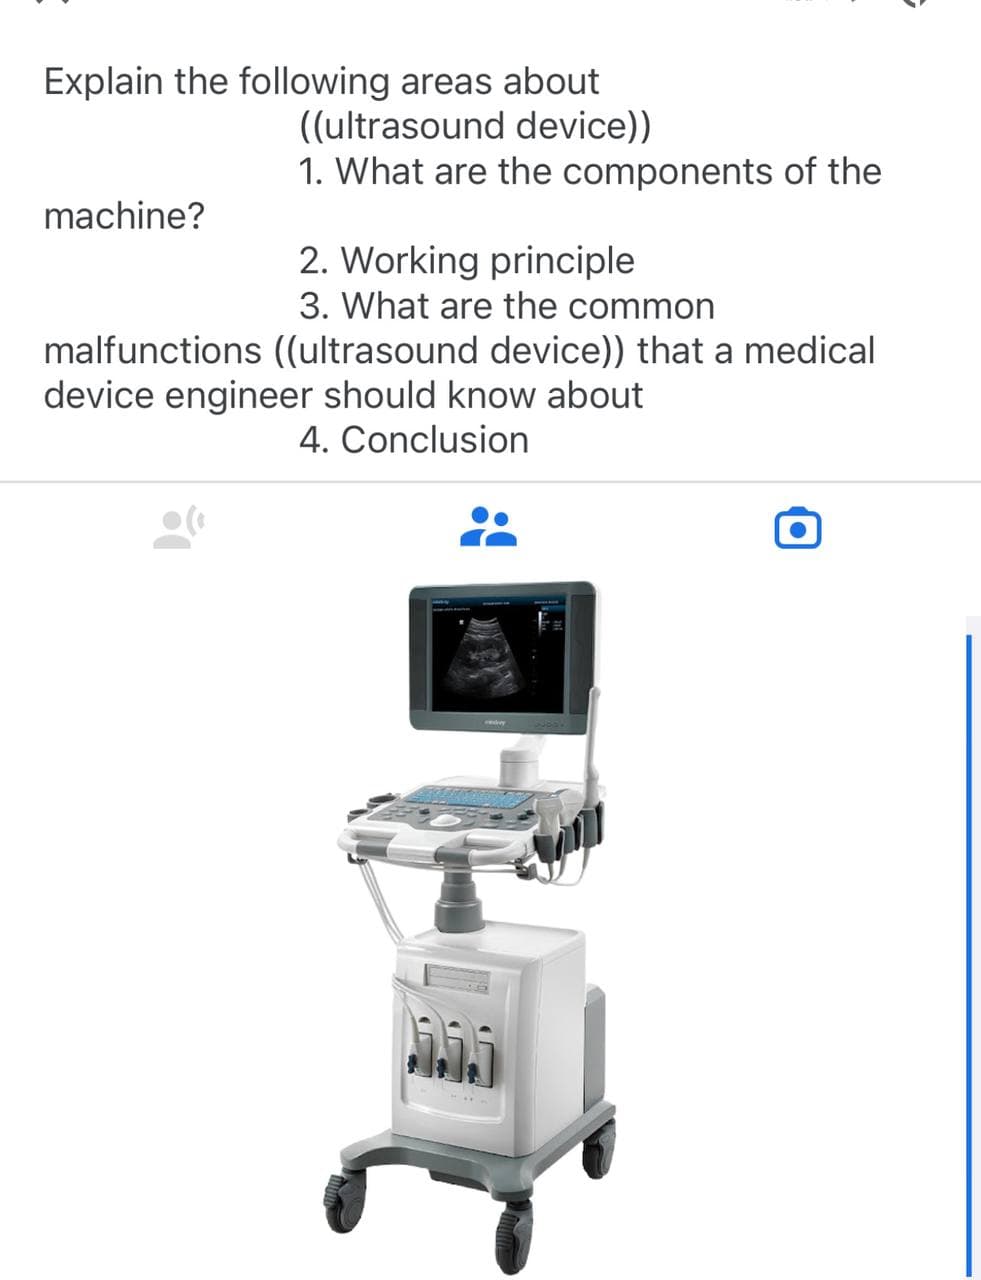 Explain the following areas about
((ultrasound device))
1. What are the components of the
machine?
2. Working principle
3. What are the common
malfunctions ((ultrasound device)) that a medical
device engineer should know about
4. Conclusion